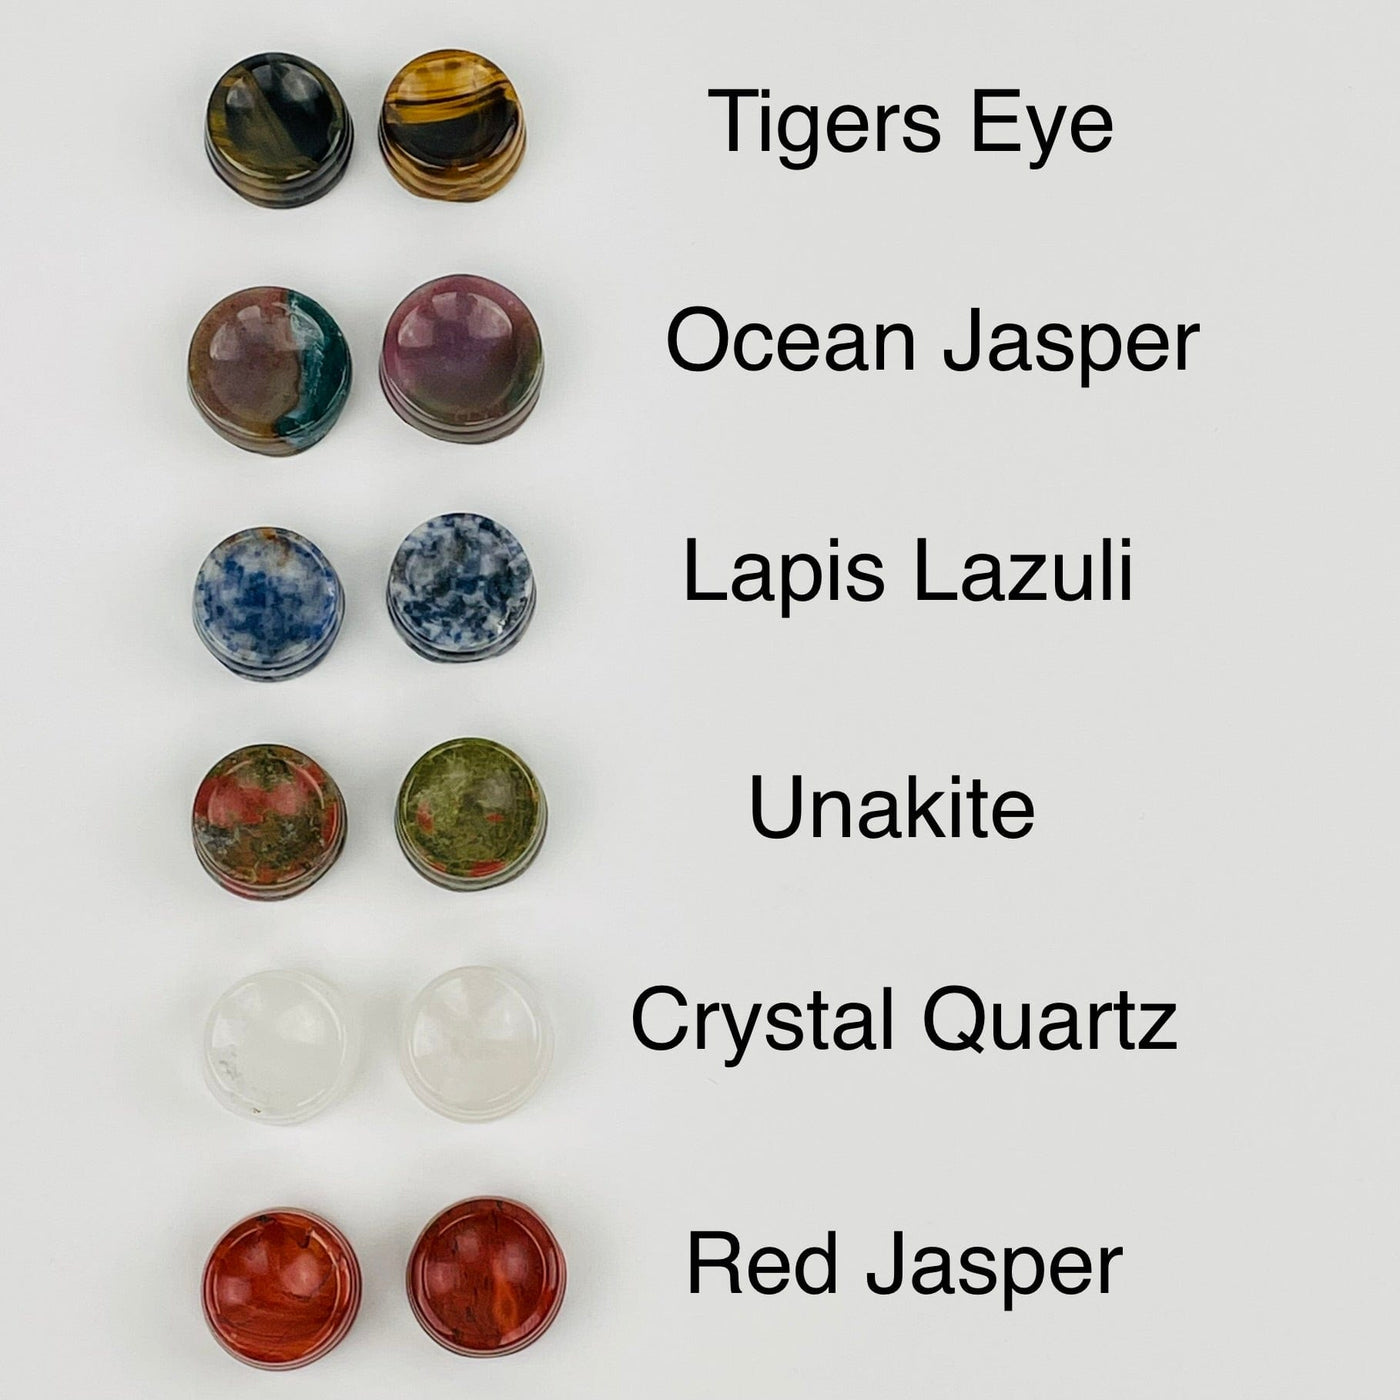 sphere holder next to its crystal name 